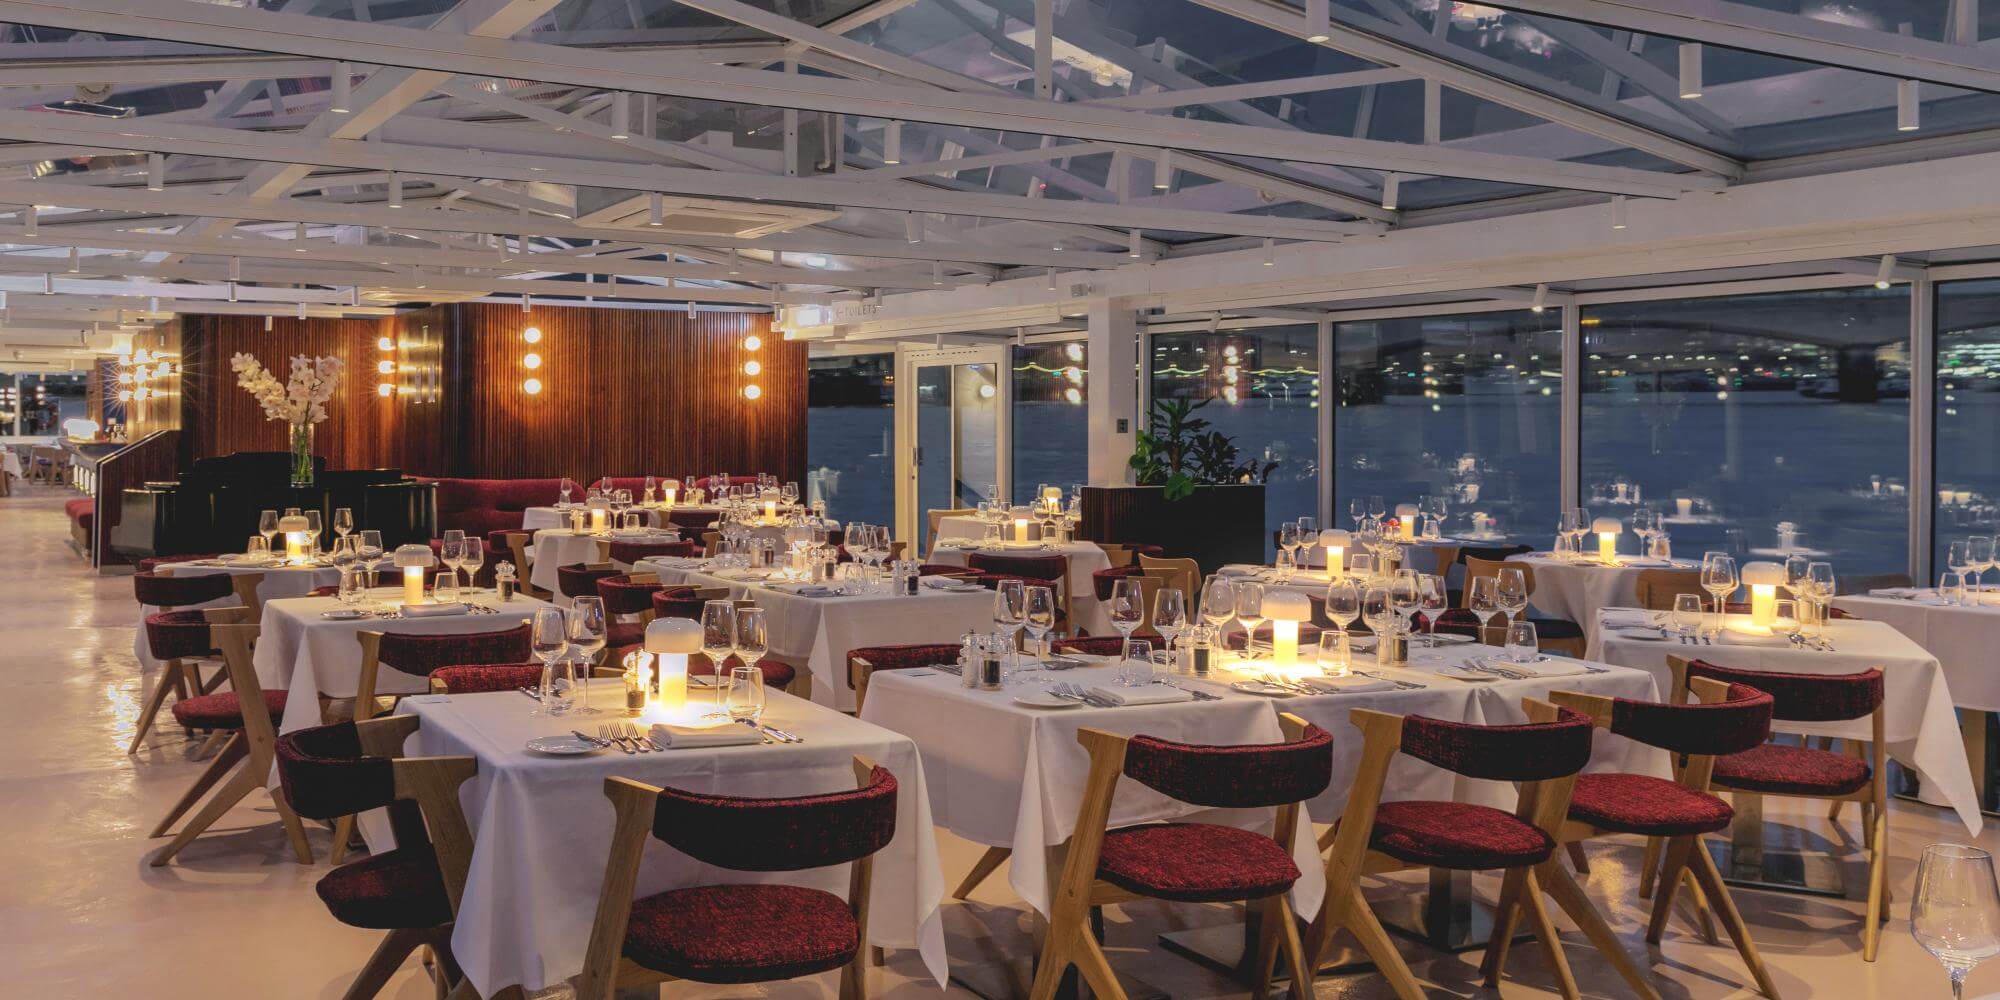 The Glass Room Thames dinner boat has been newly refurbished.